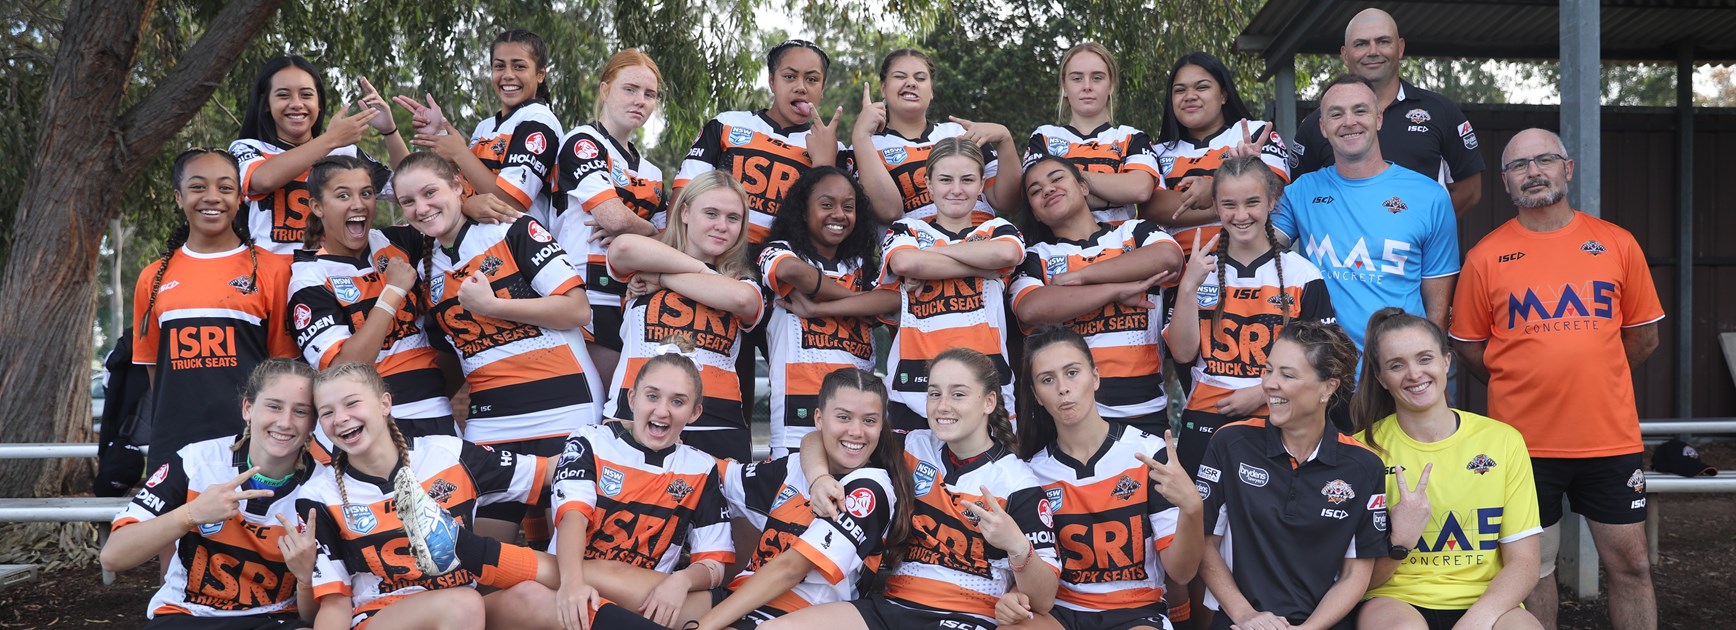 Join the Wests Tigers Tarsha Gale squad in 2019!